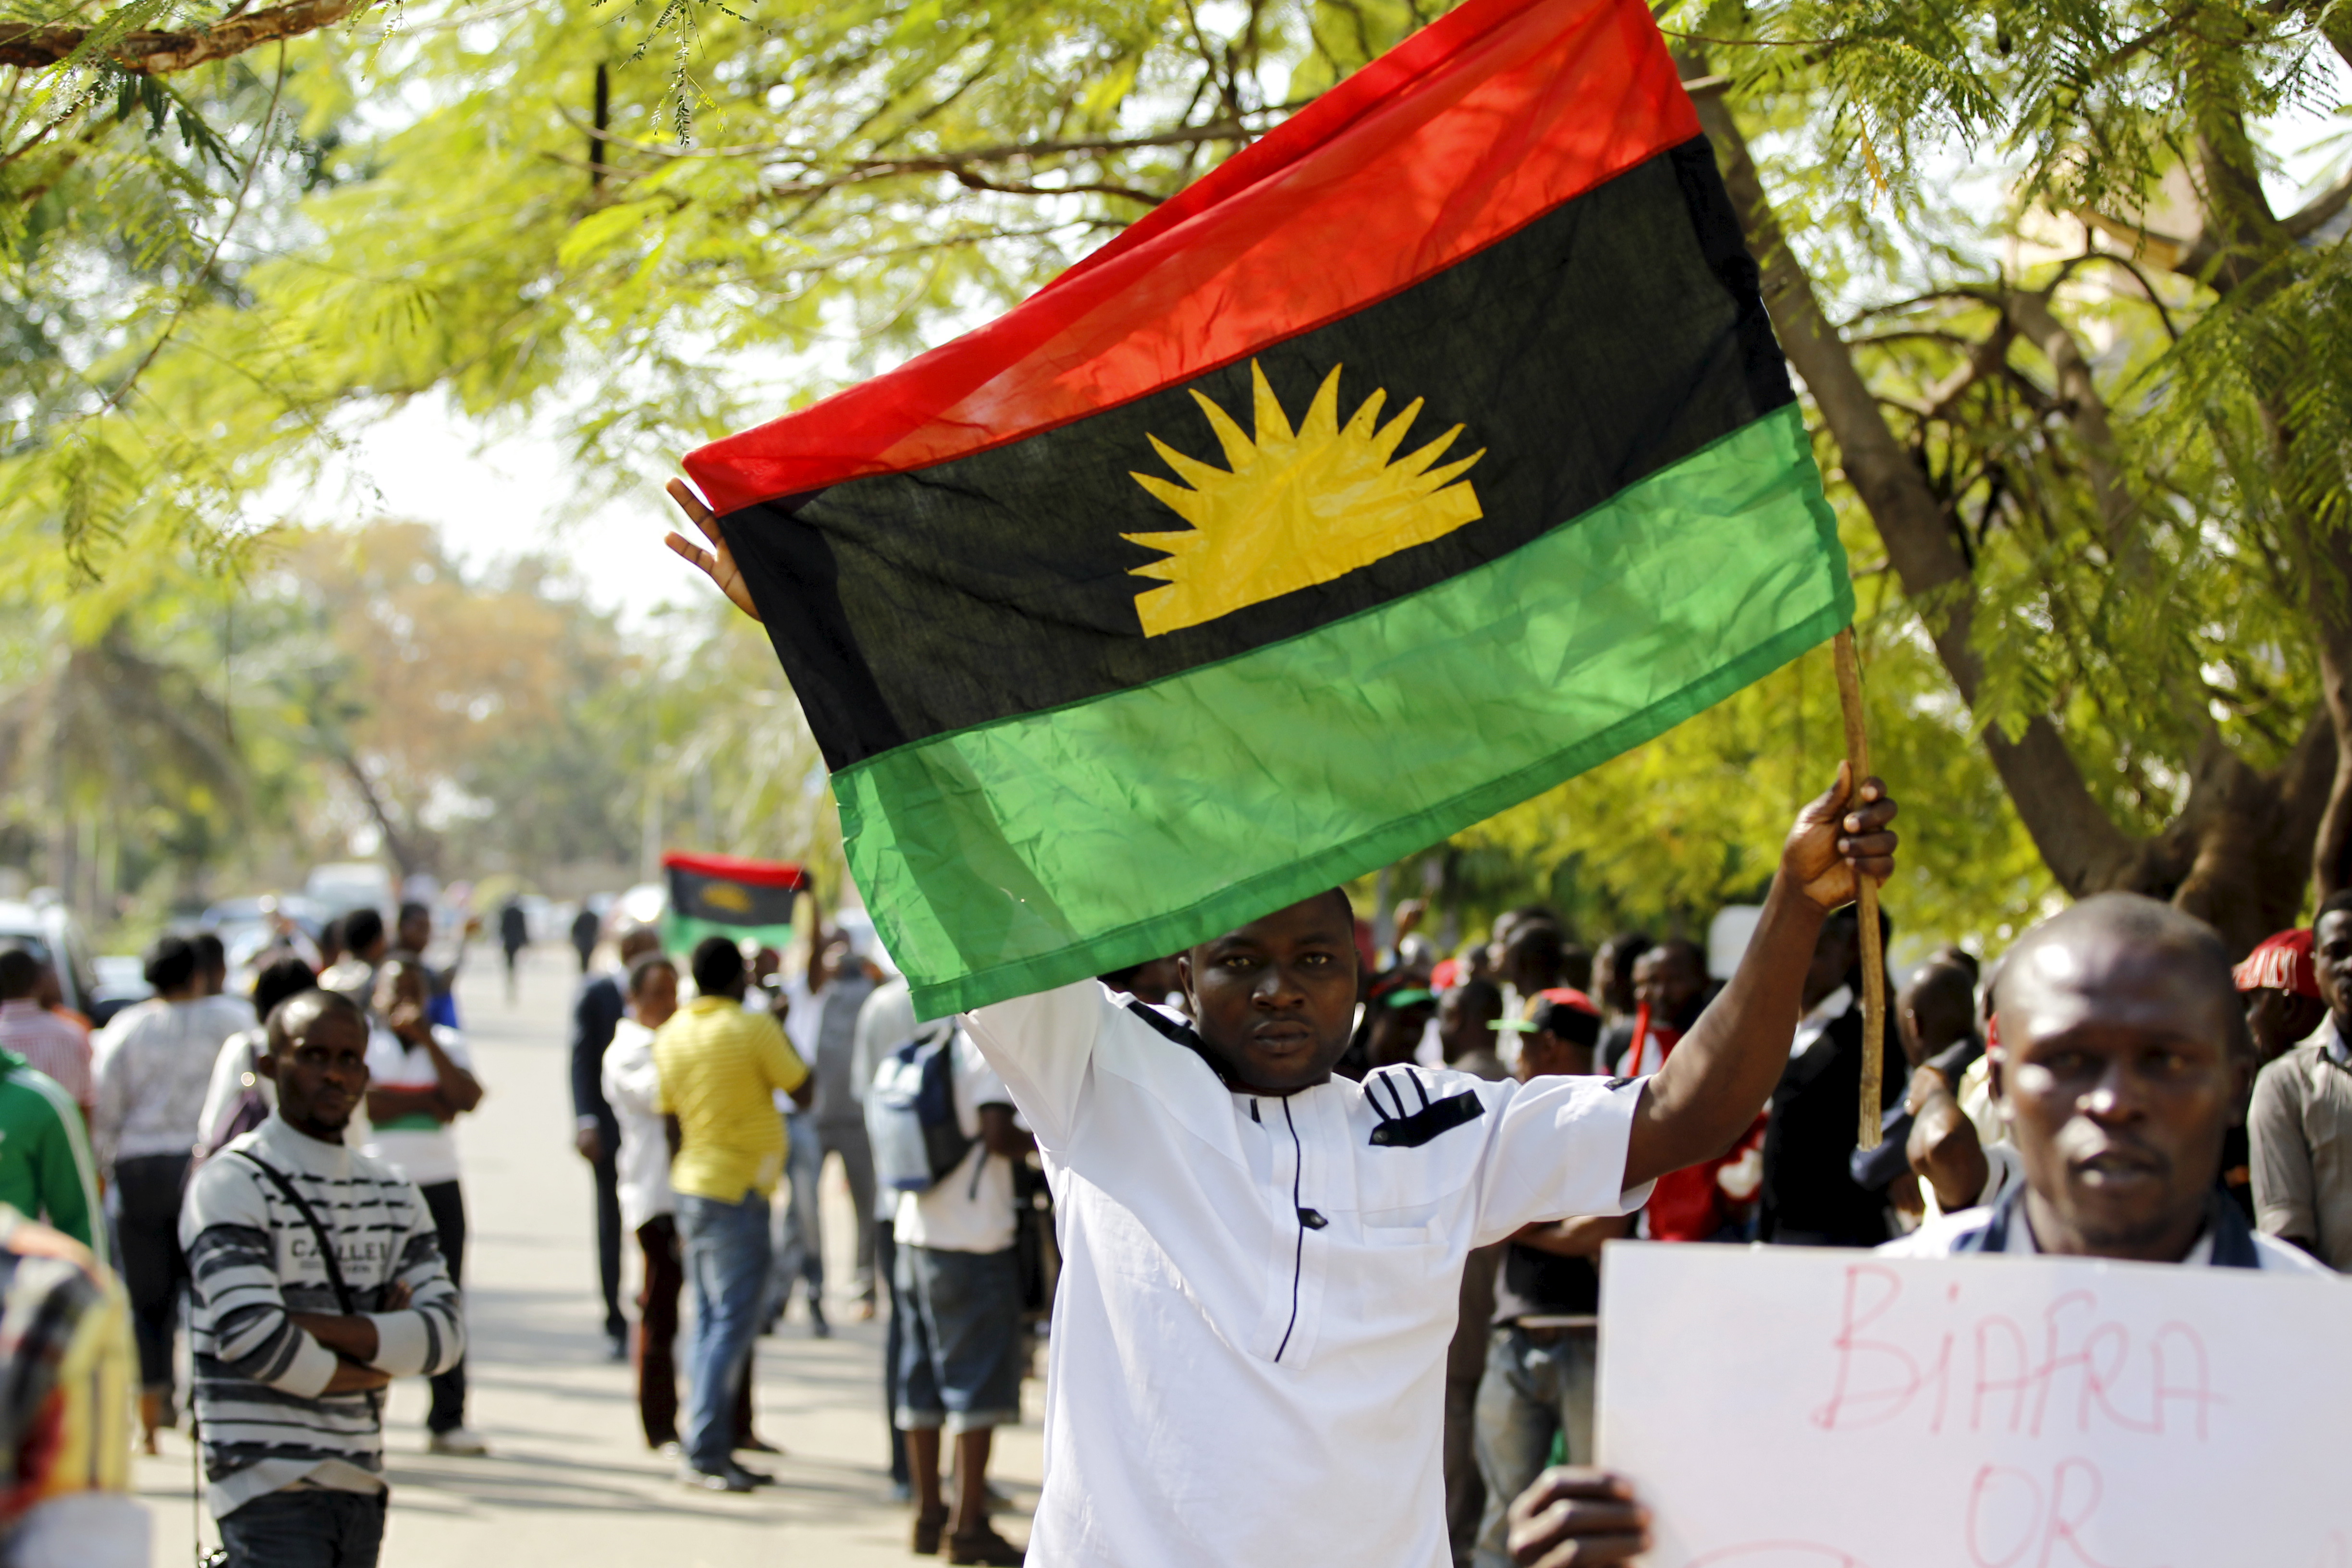 IPOB declares 40 members missing after attack by security agencies